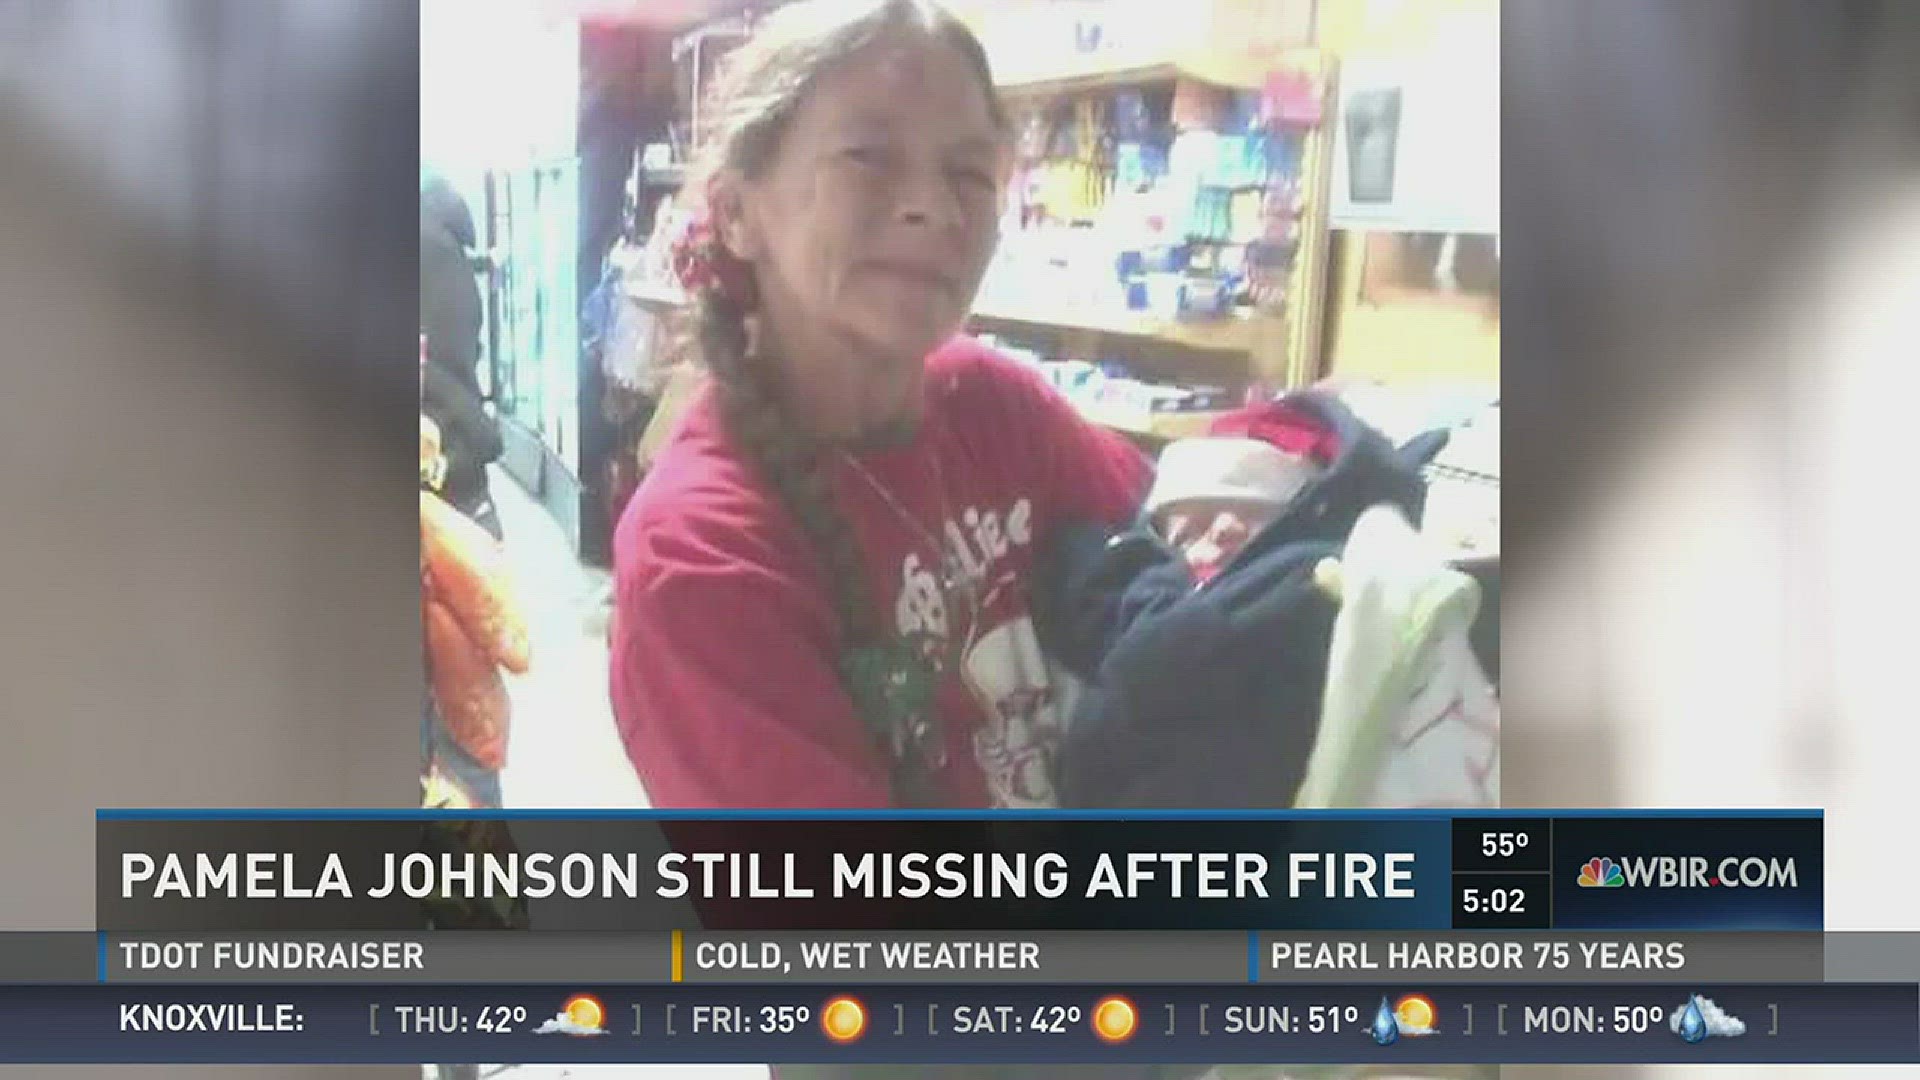 Johnson lived at the Travelers Motel in Gatlinburg, Friends there are mourning a woman they called the mother of their group. Johnson has not been seen since the fire, but she has not been confirmed dead.